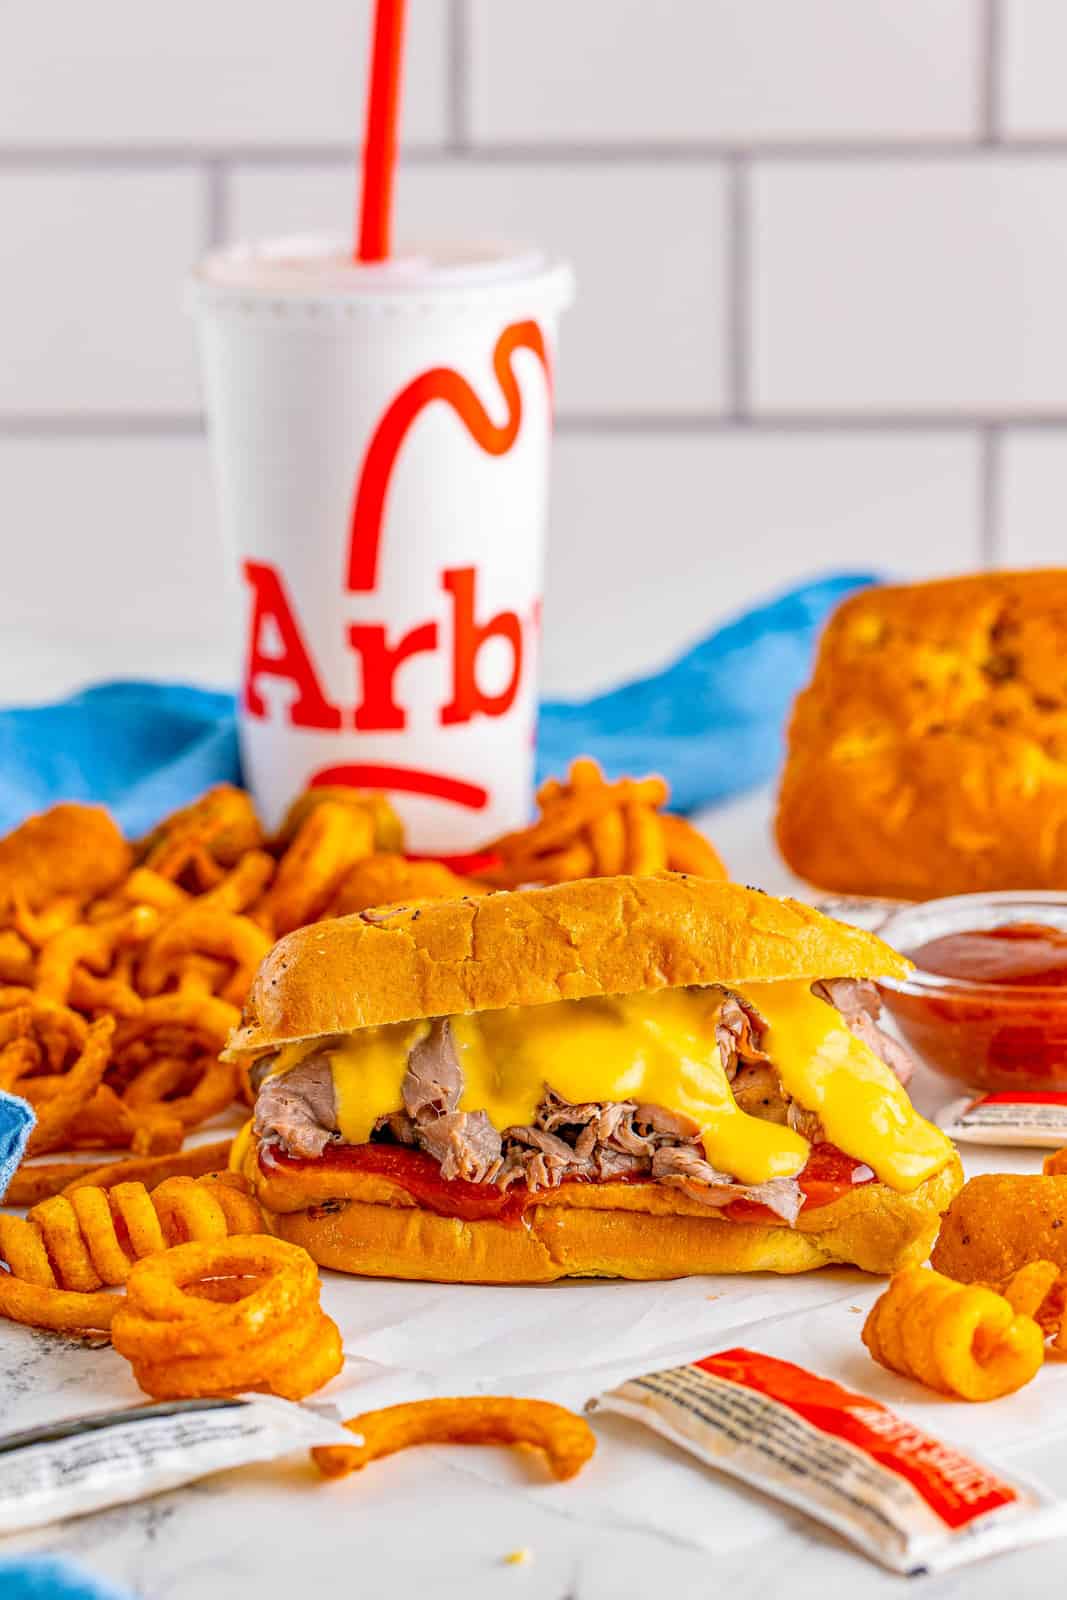 Full meal with Arby's Roast Beef and Cheddar with drink in back.